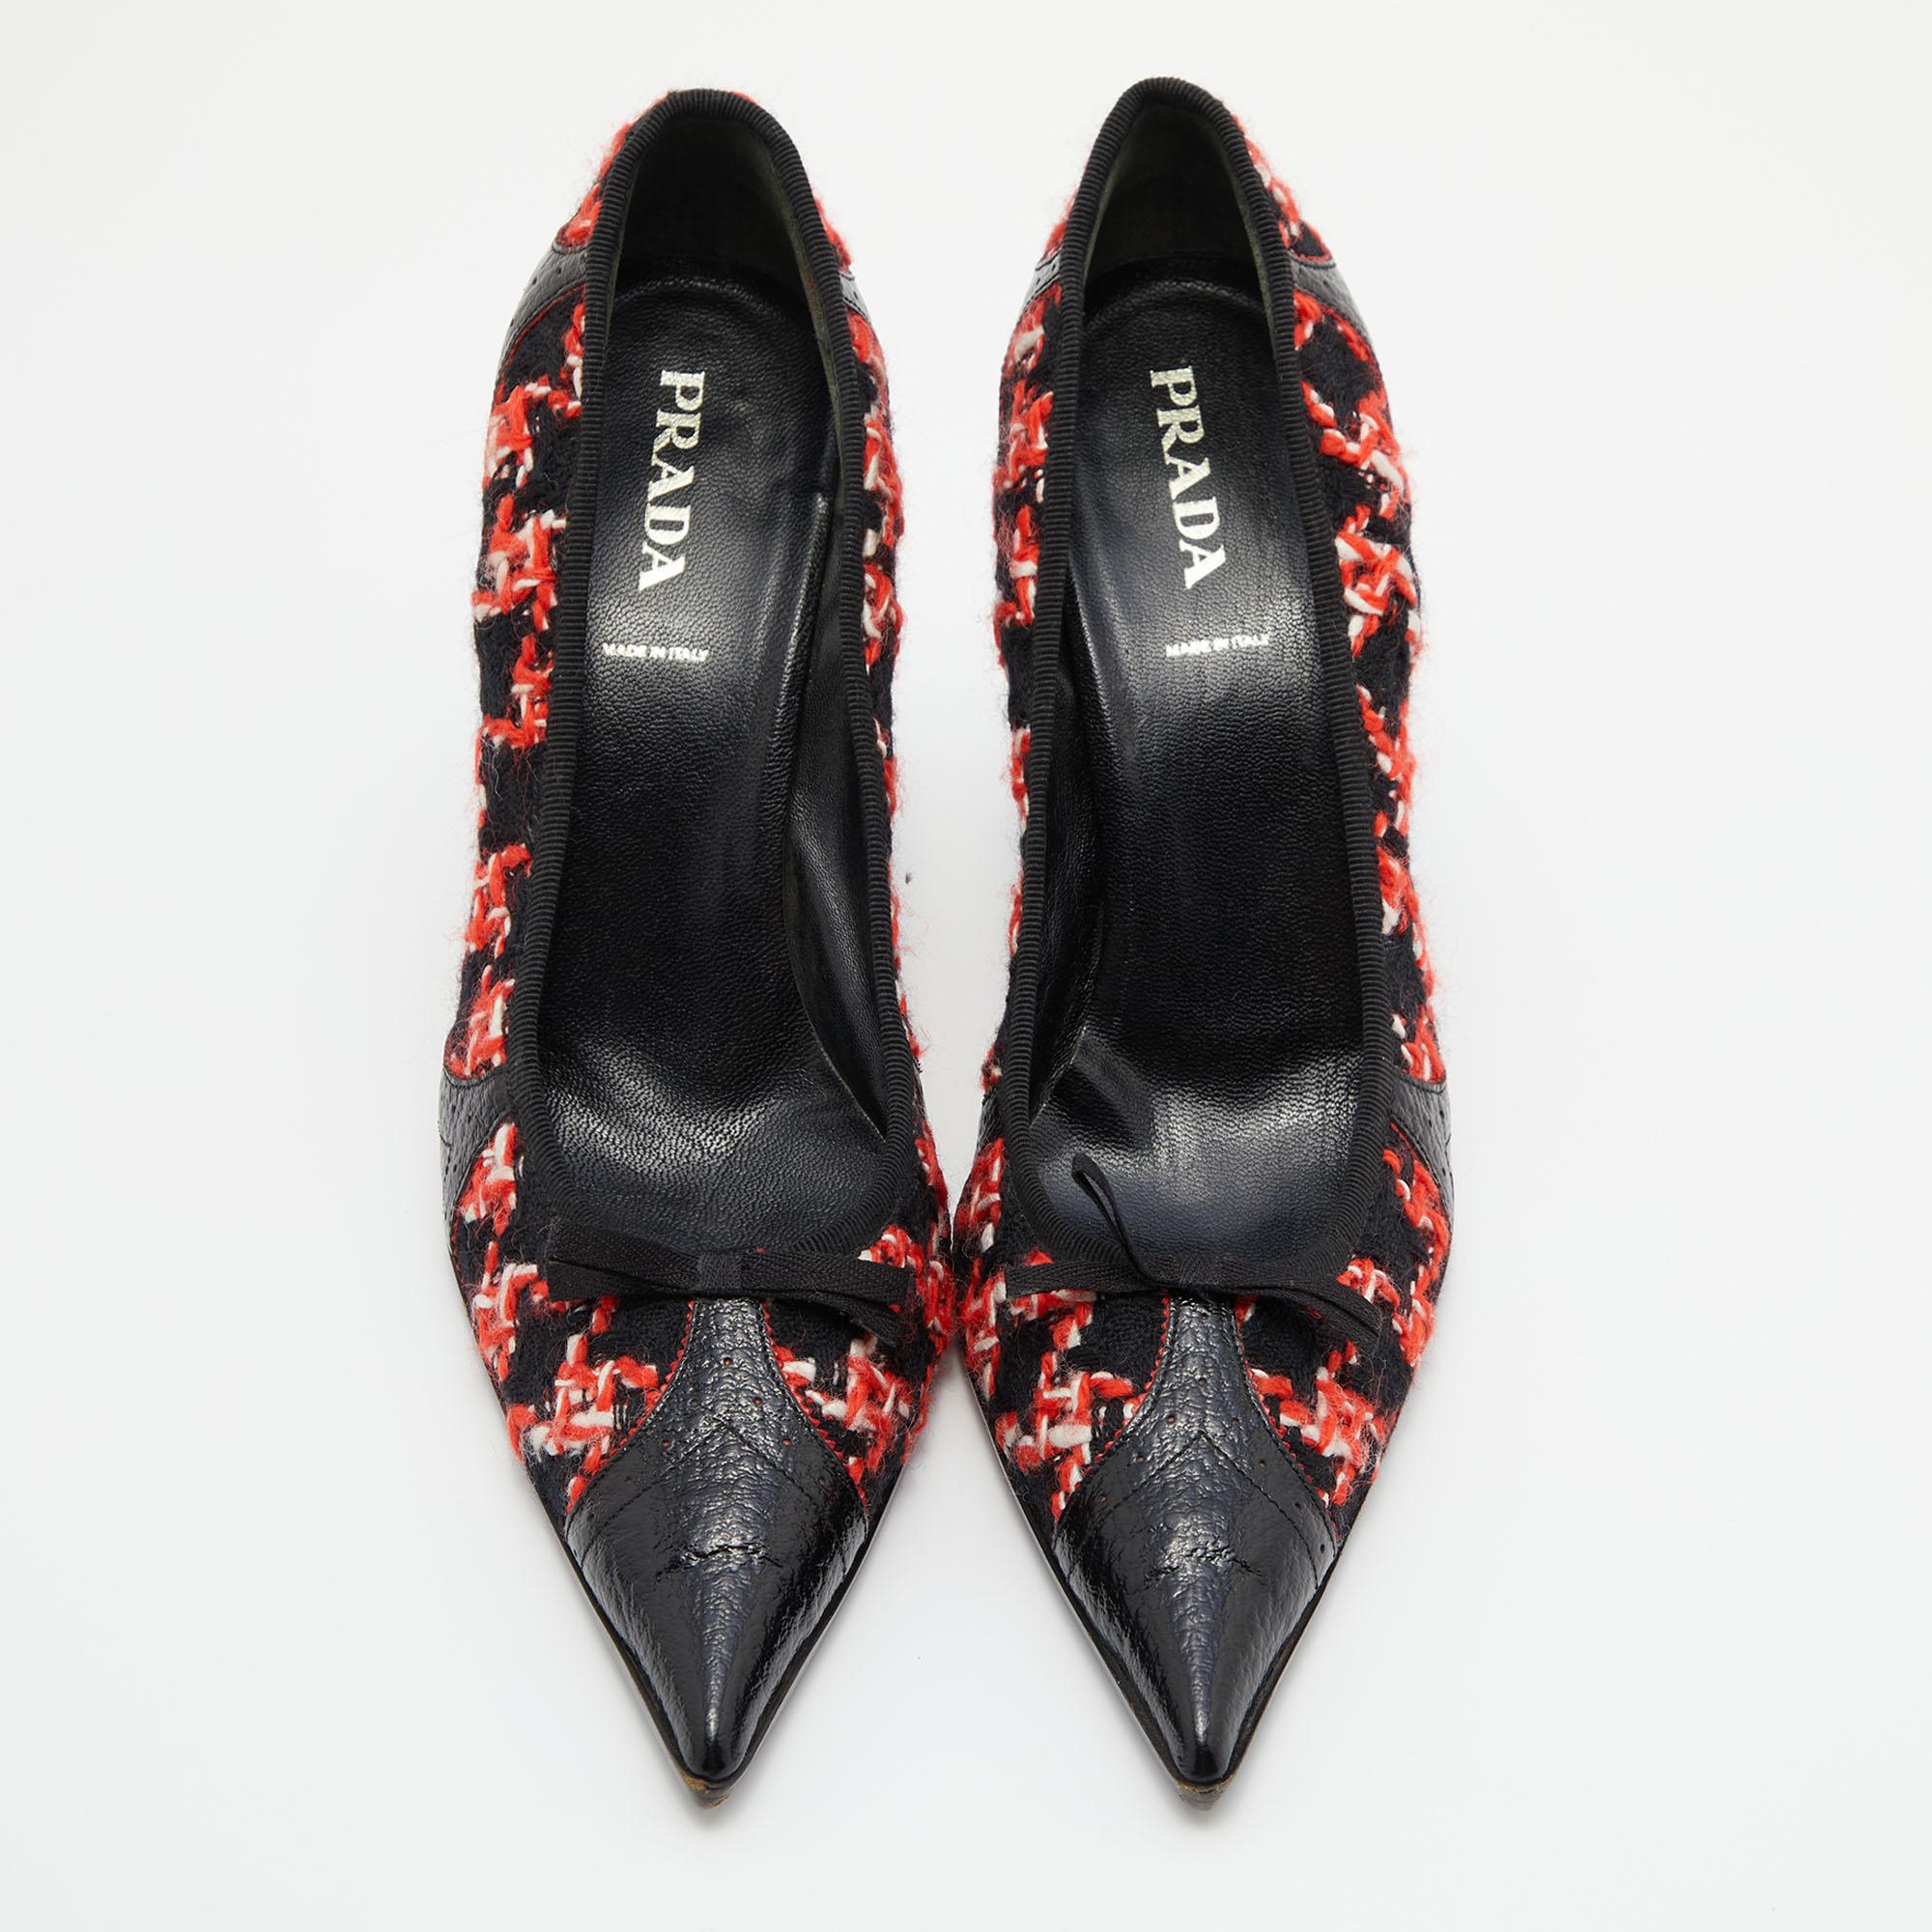 Prada Black/Red Tweed and Leather Pointed Toe Bow Detail Pumps 40 2